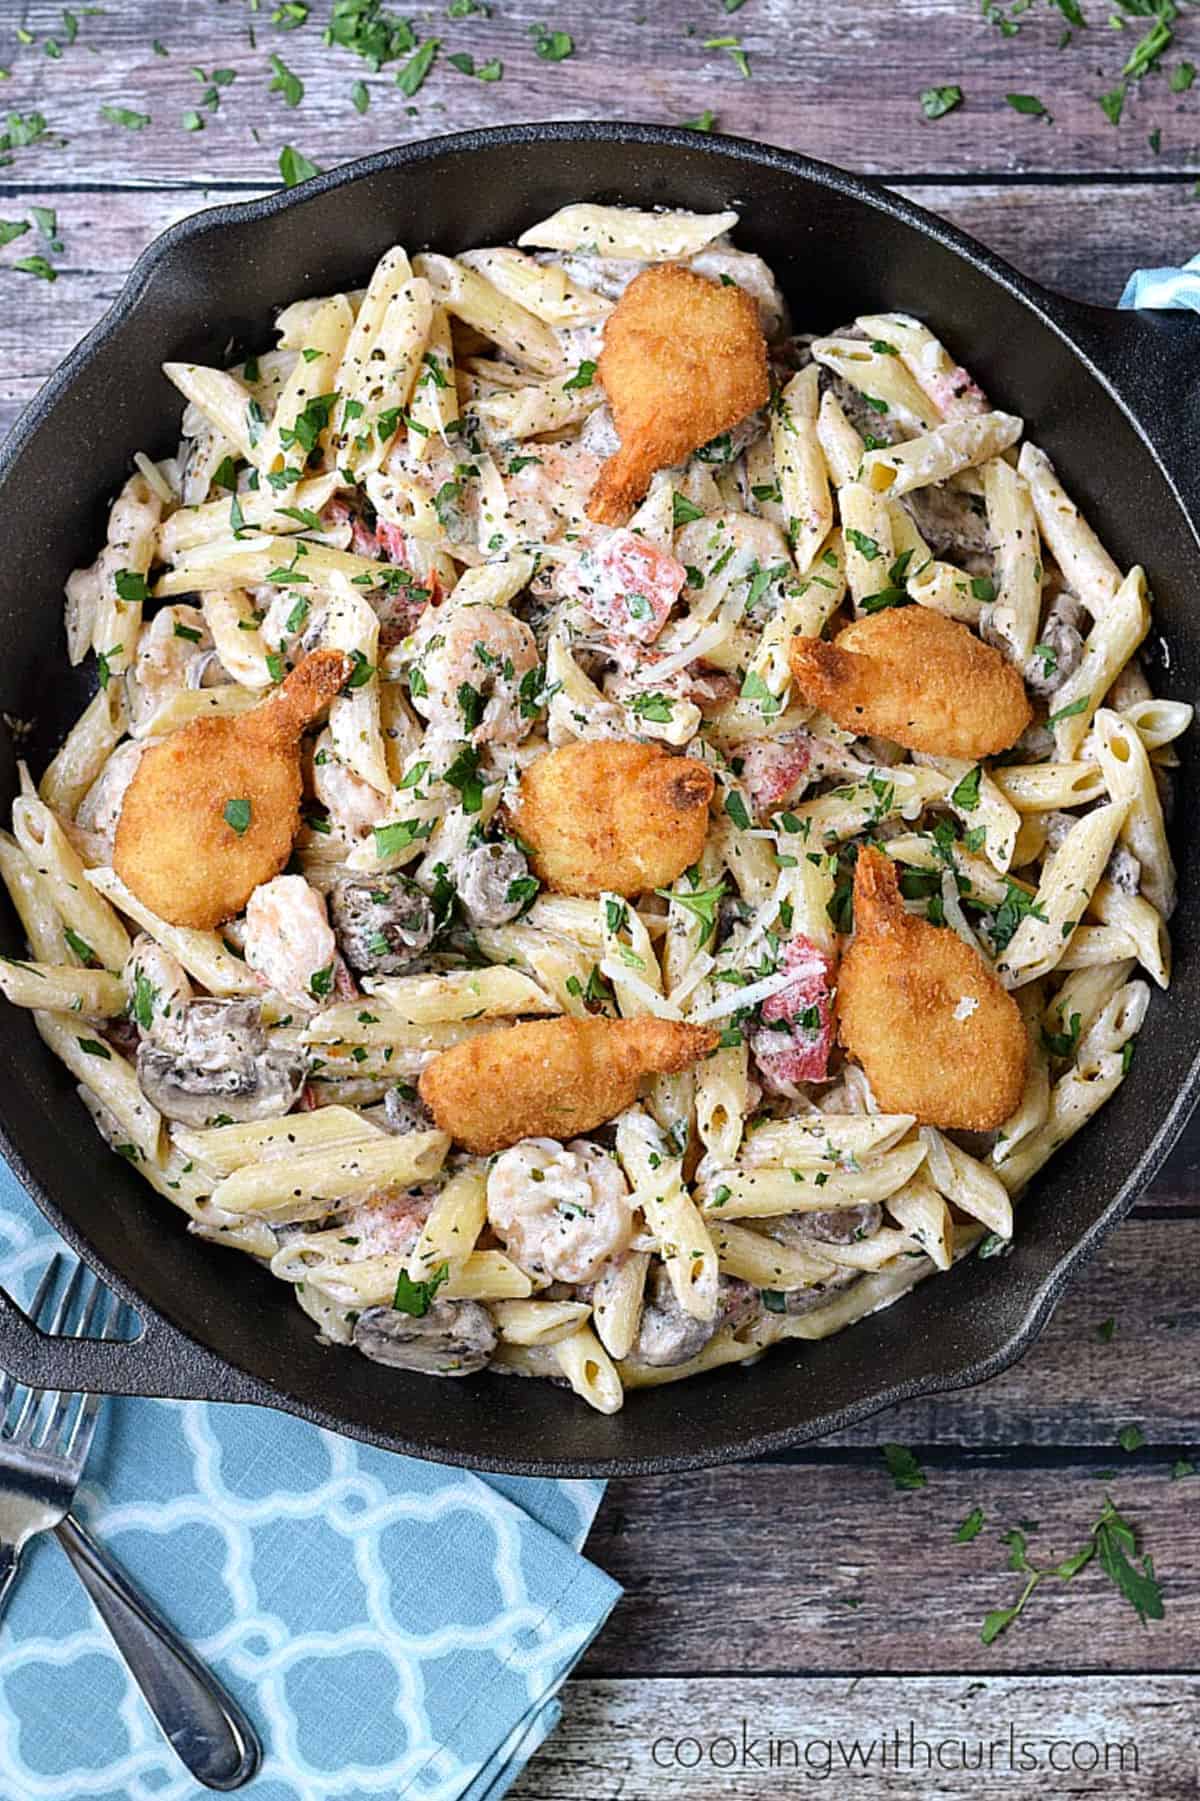 Looking down on a cast iron skillet filled with penne pasta, creamy sauce, tomatoes, mushrooms, and breaded shrimp.